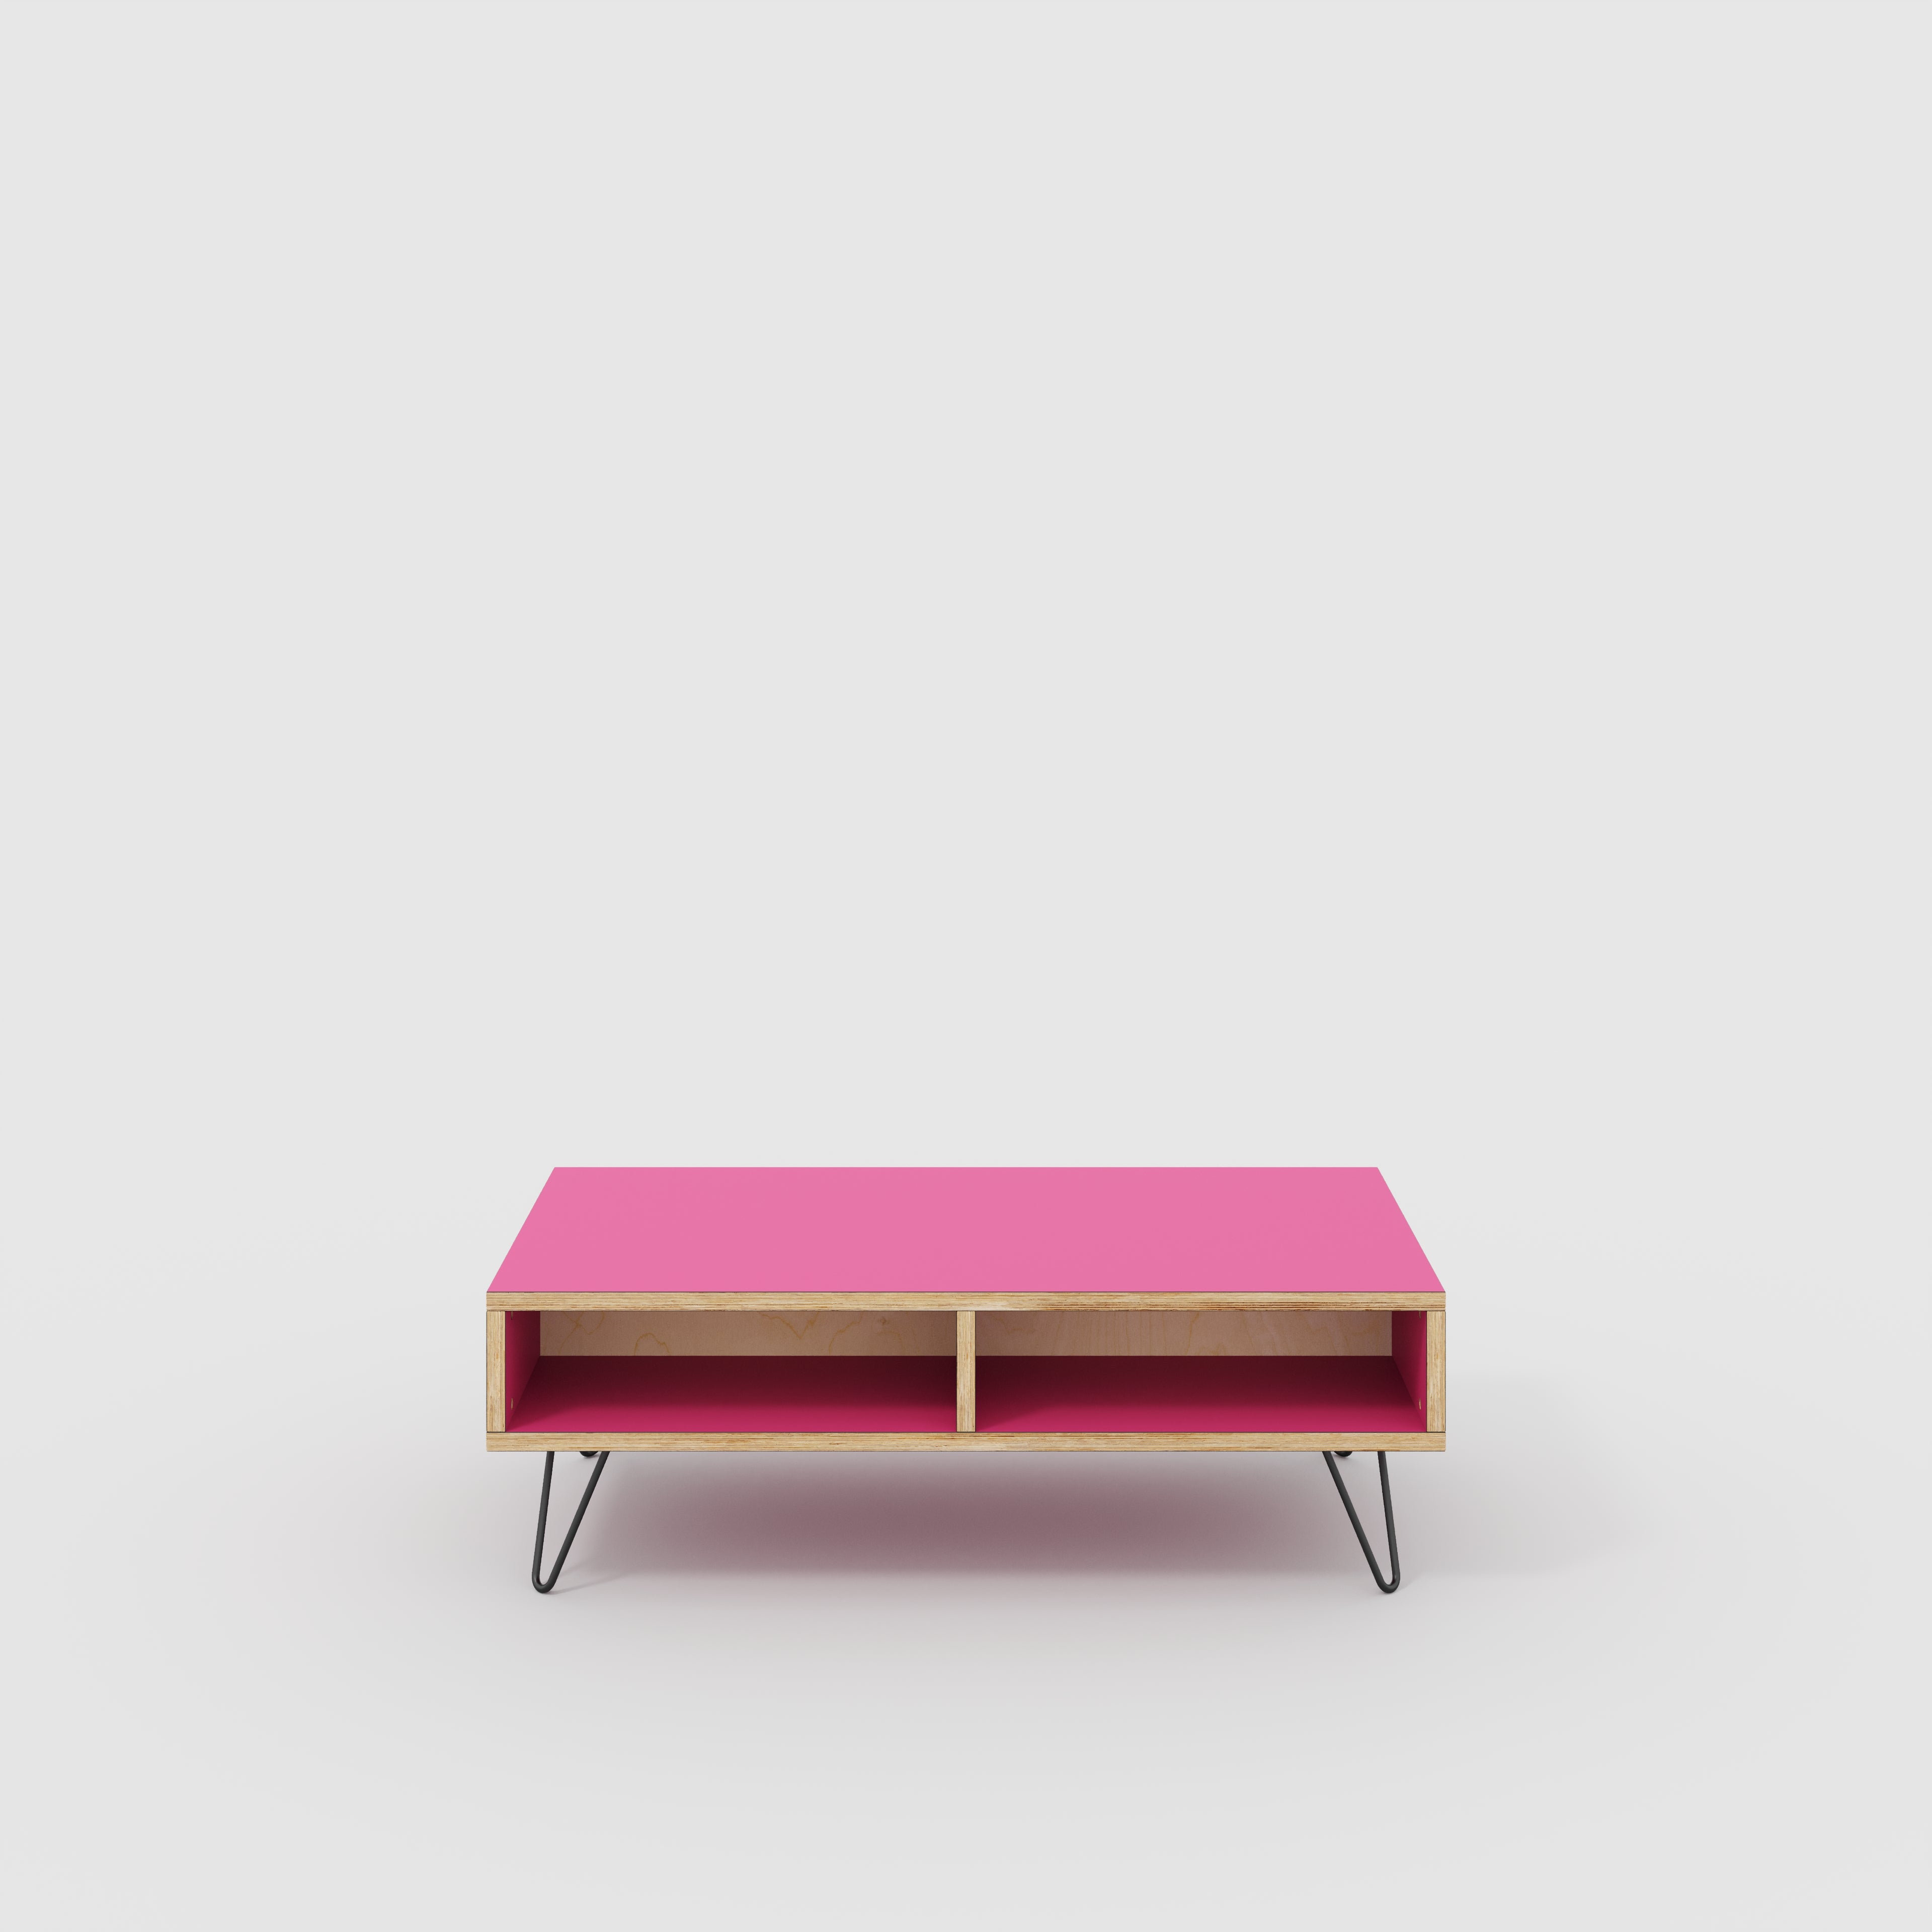 Coffee Table with Box Storage and Black Hairpin Legs - Formica Juicy Pink - 1200(w) x 600(d) x 400(h)